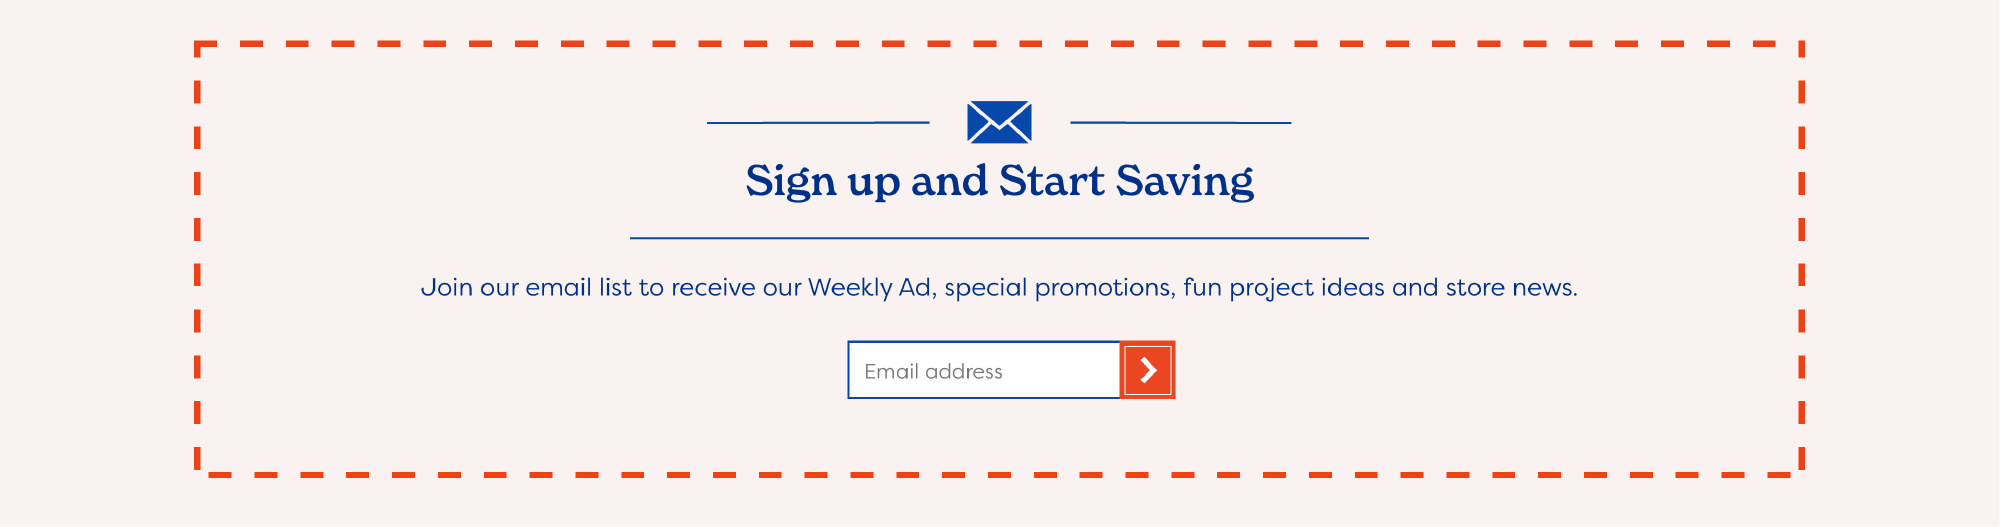 Basing the Email Sign-Up pop up into a new section above the footer.